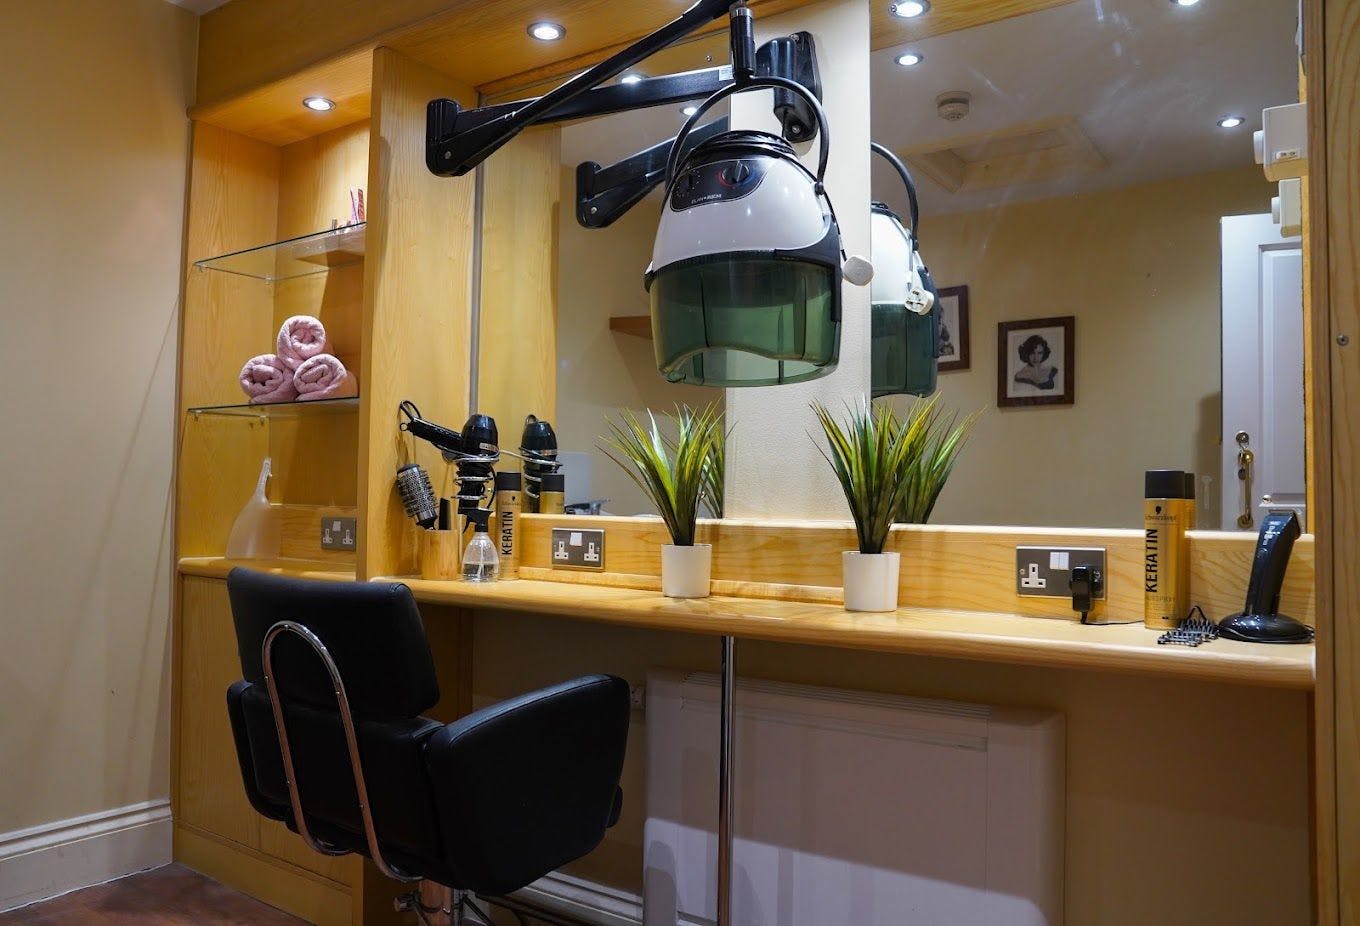 Salon at Beach Lawns Care Home in Somerset, South West England